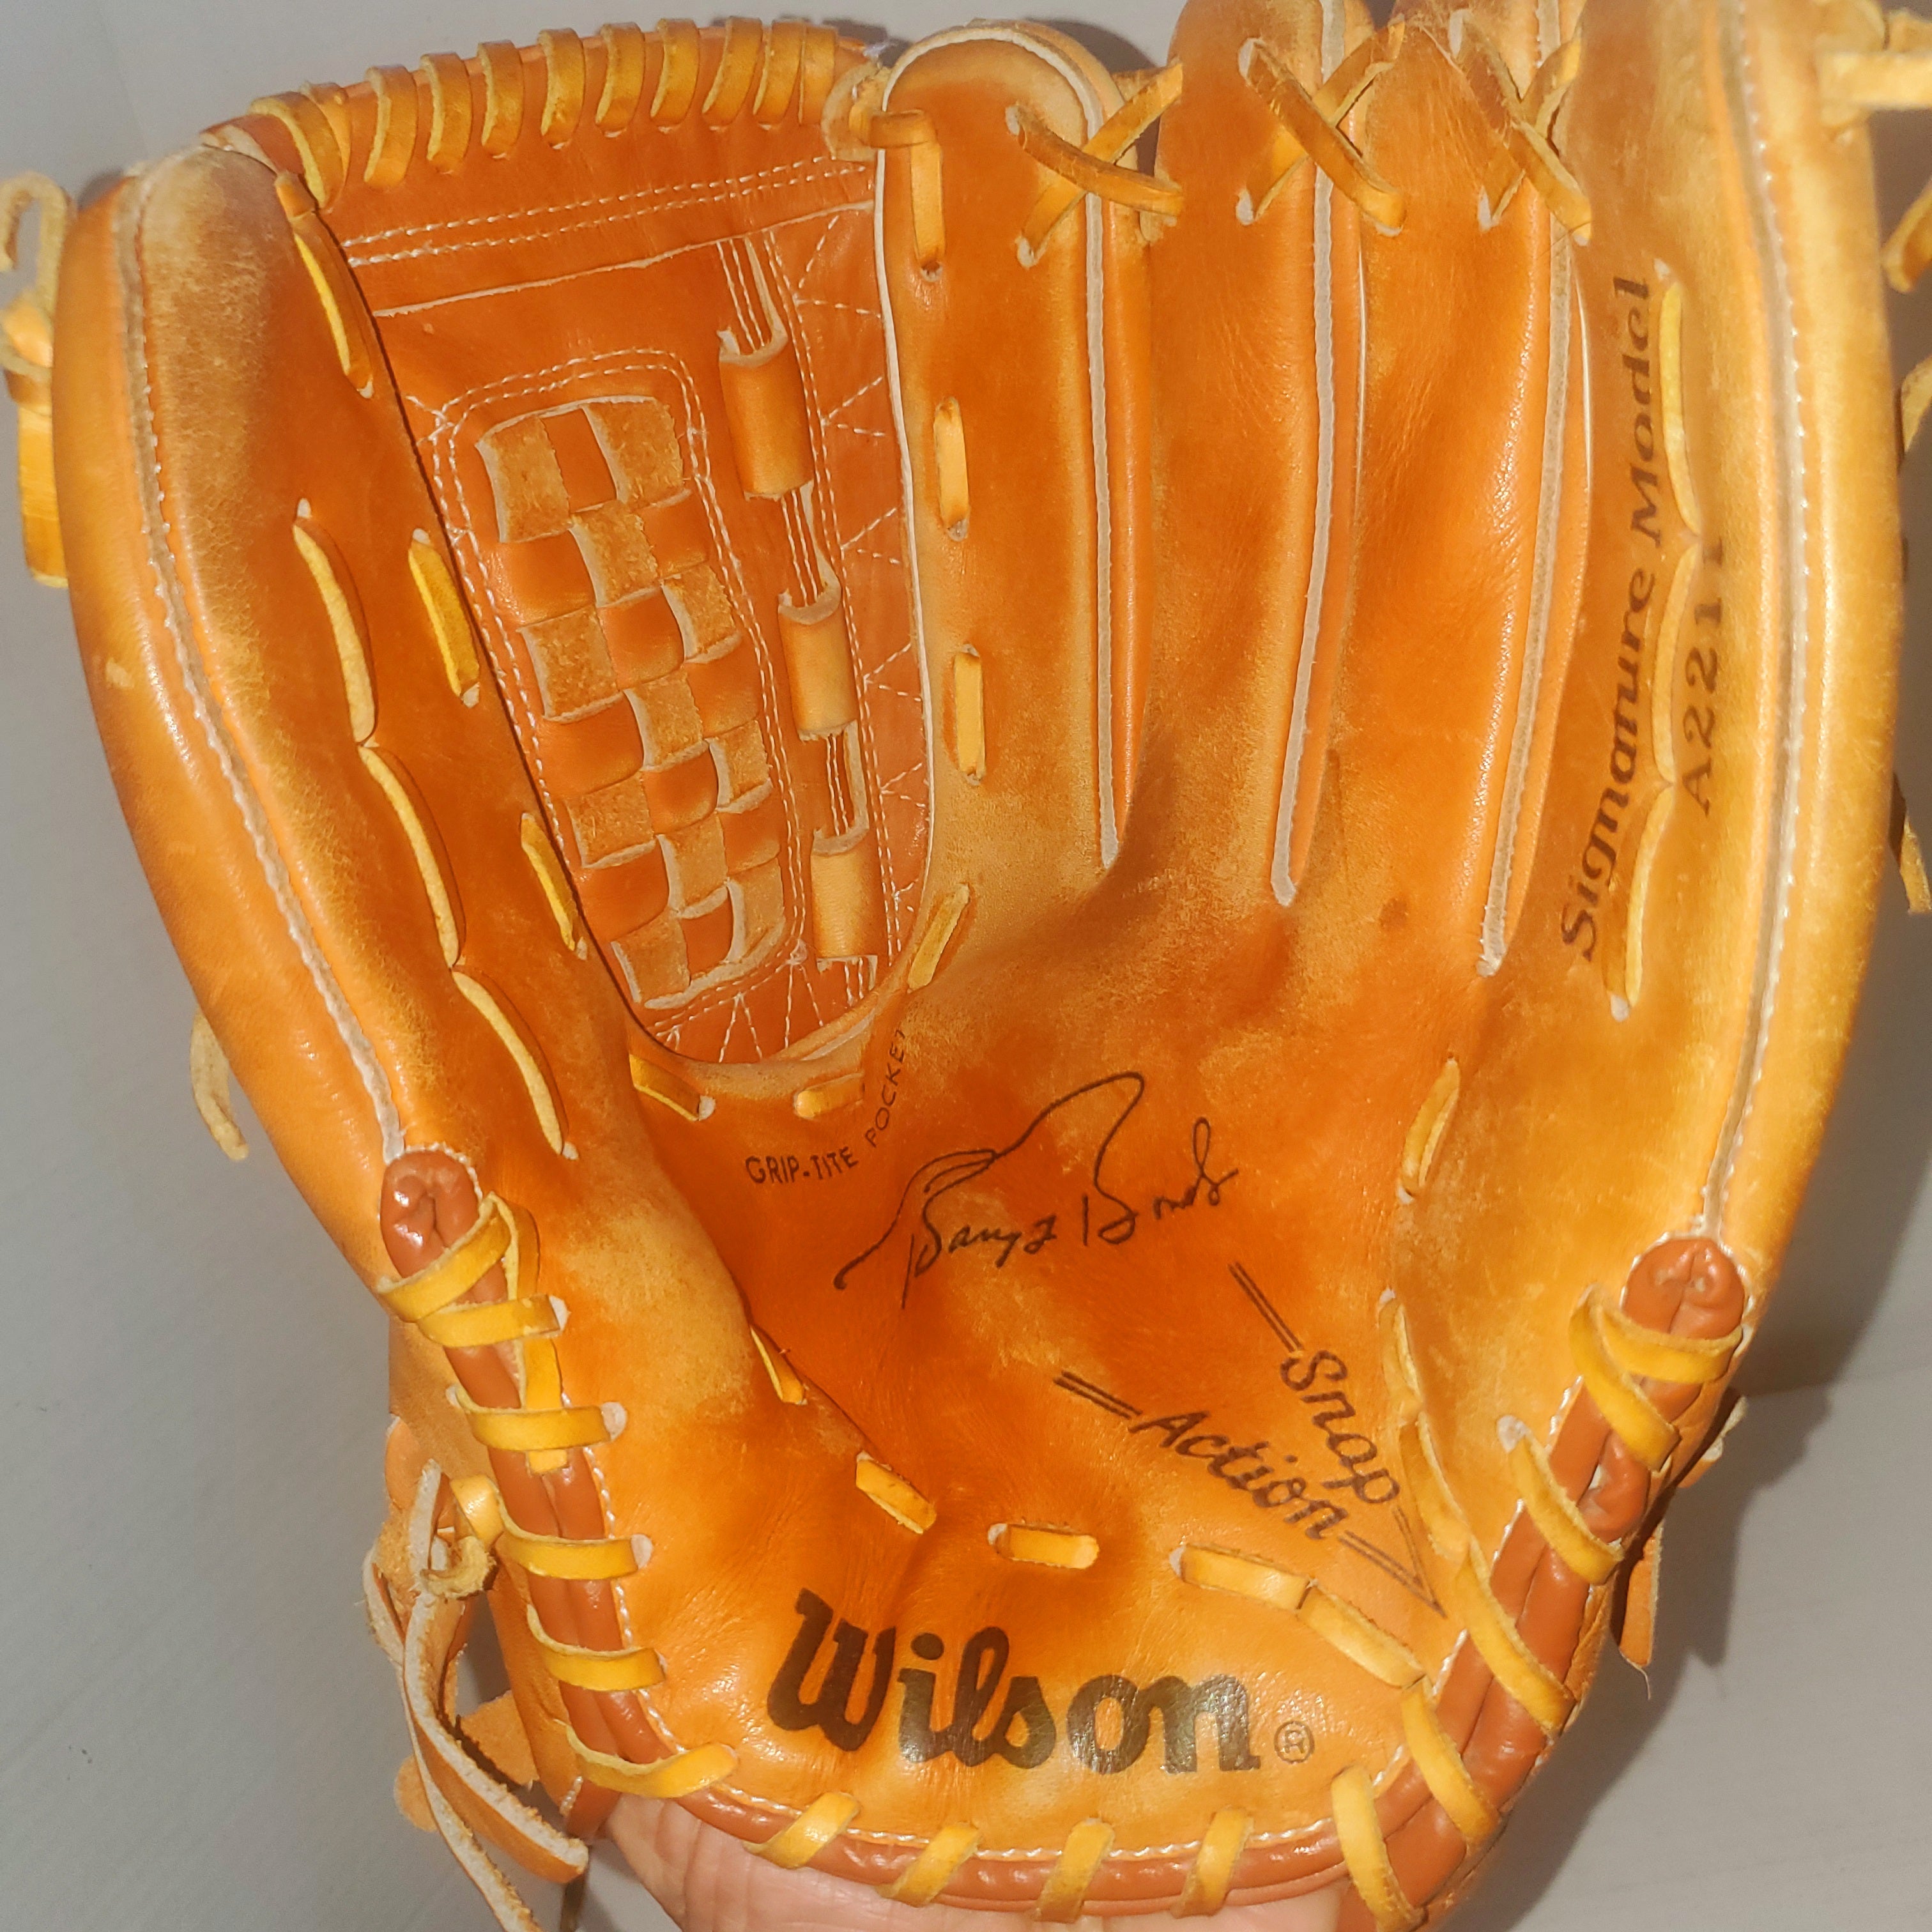 Used Right Hand Throw 12 Signiture Series Baseball Glove